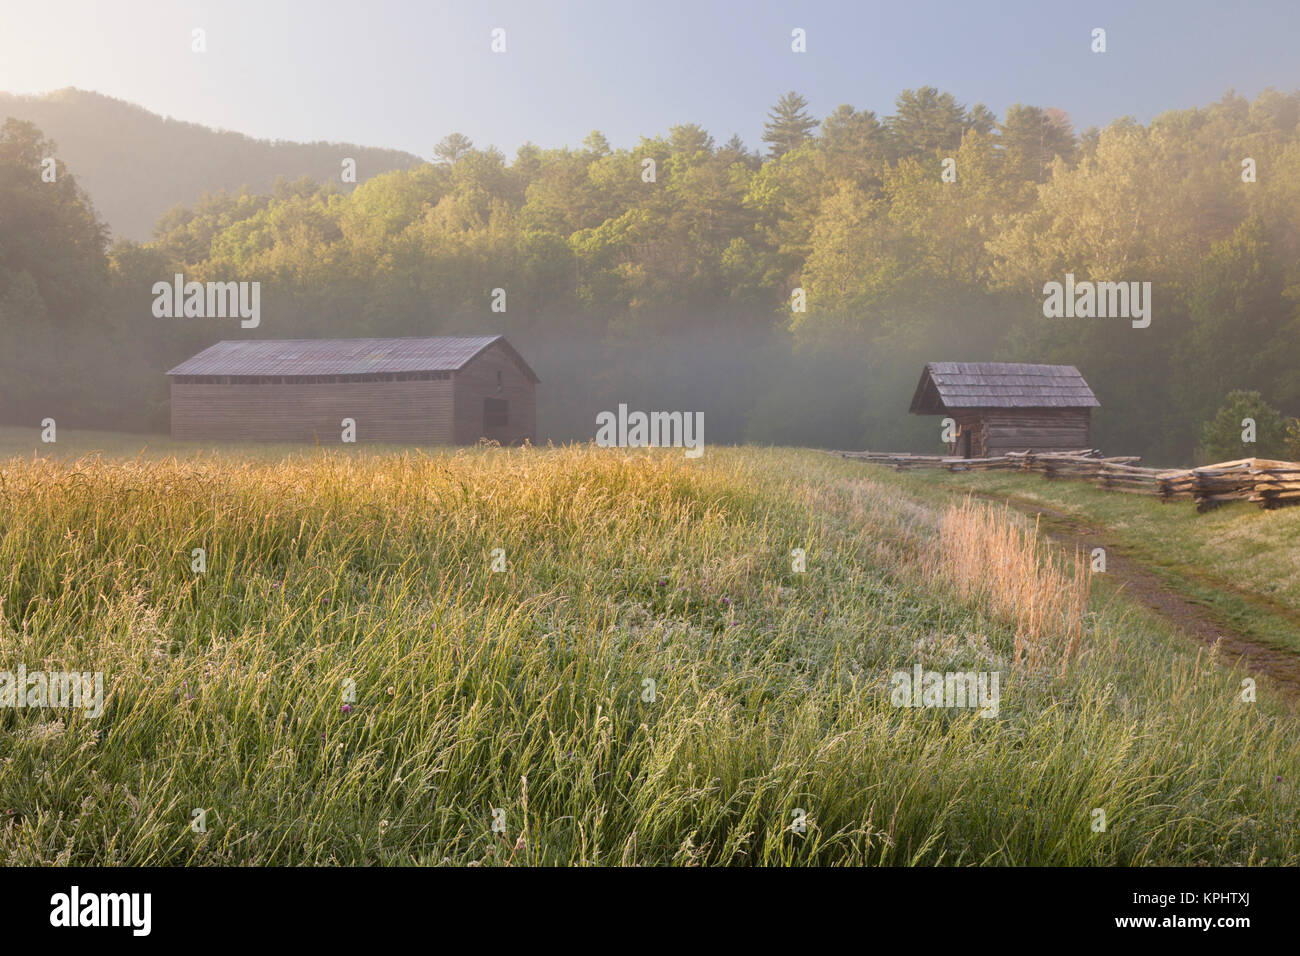 Dan Lawson luogo presso sunrise, Cades Cove, Great Smoky Mountains National Park, Tennessee Foto Stock